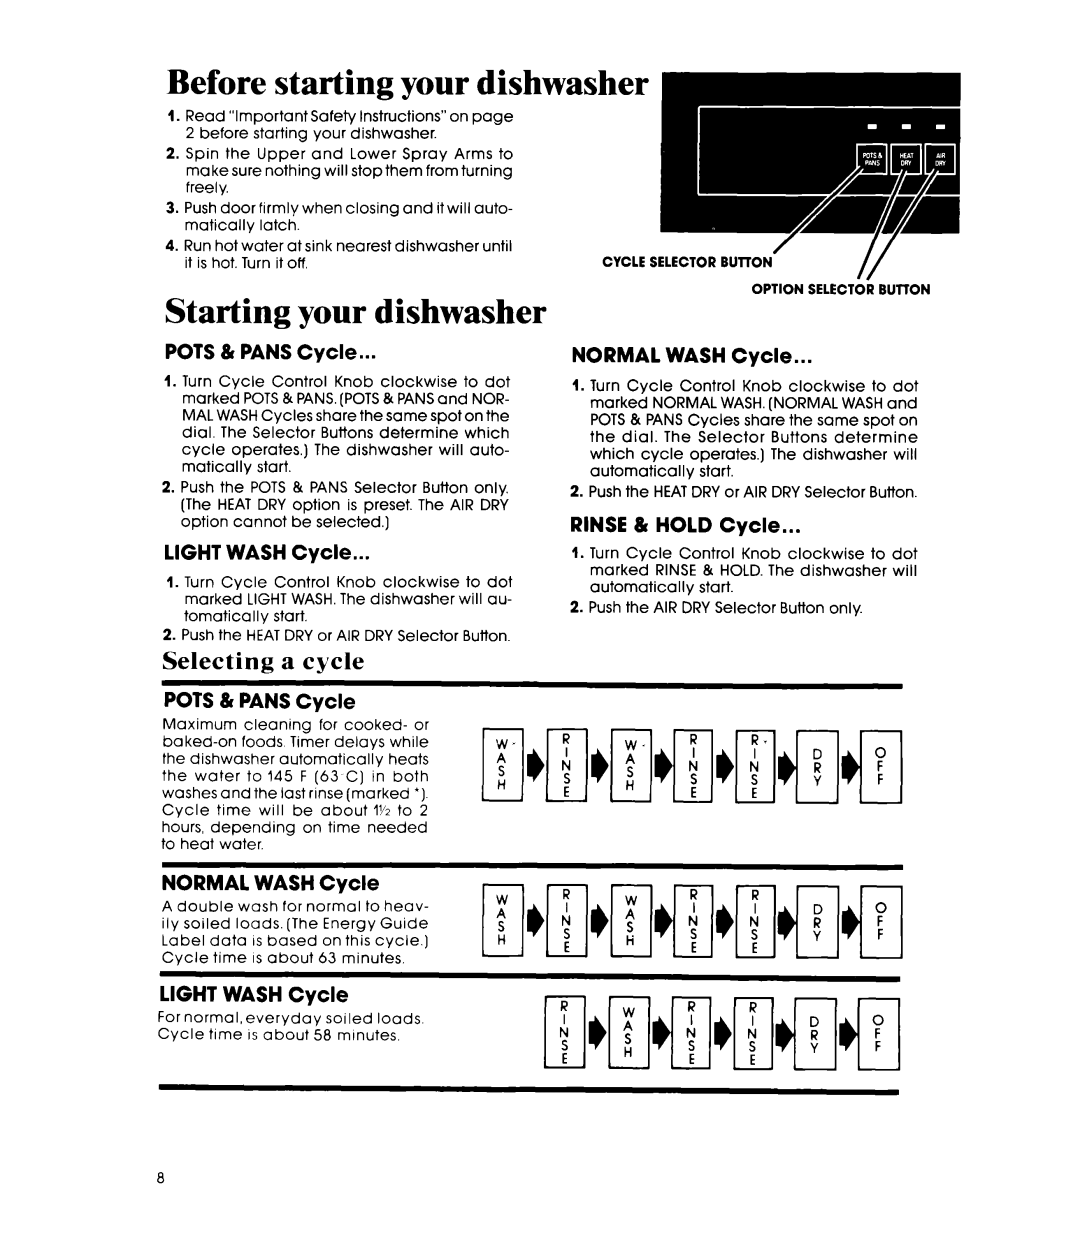 Whirlpool DU8350XT manual Before starting your dishwasher, Starting your dishwasher, Selecting a cycle, POTS & PANS Cycle 